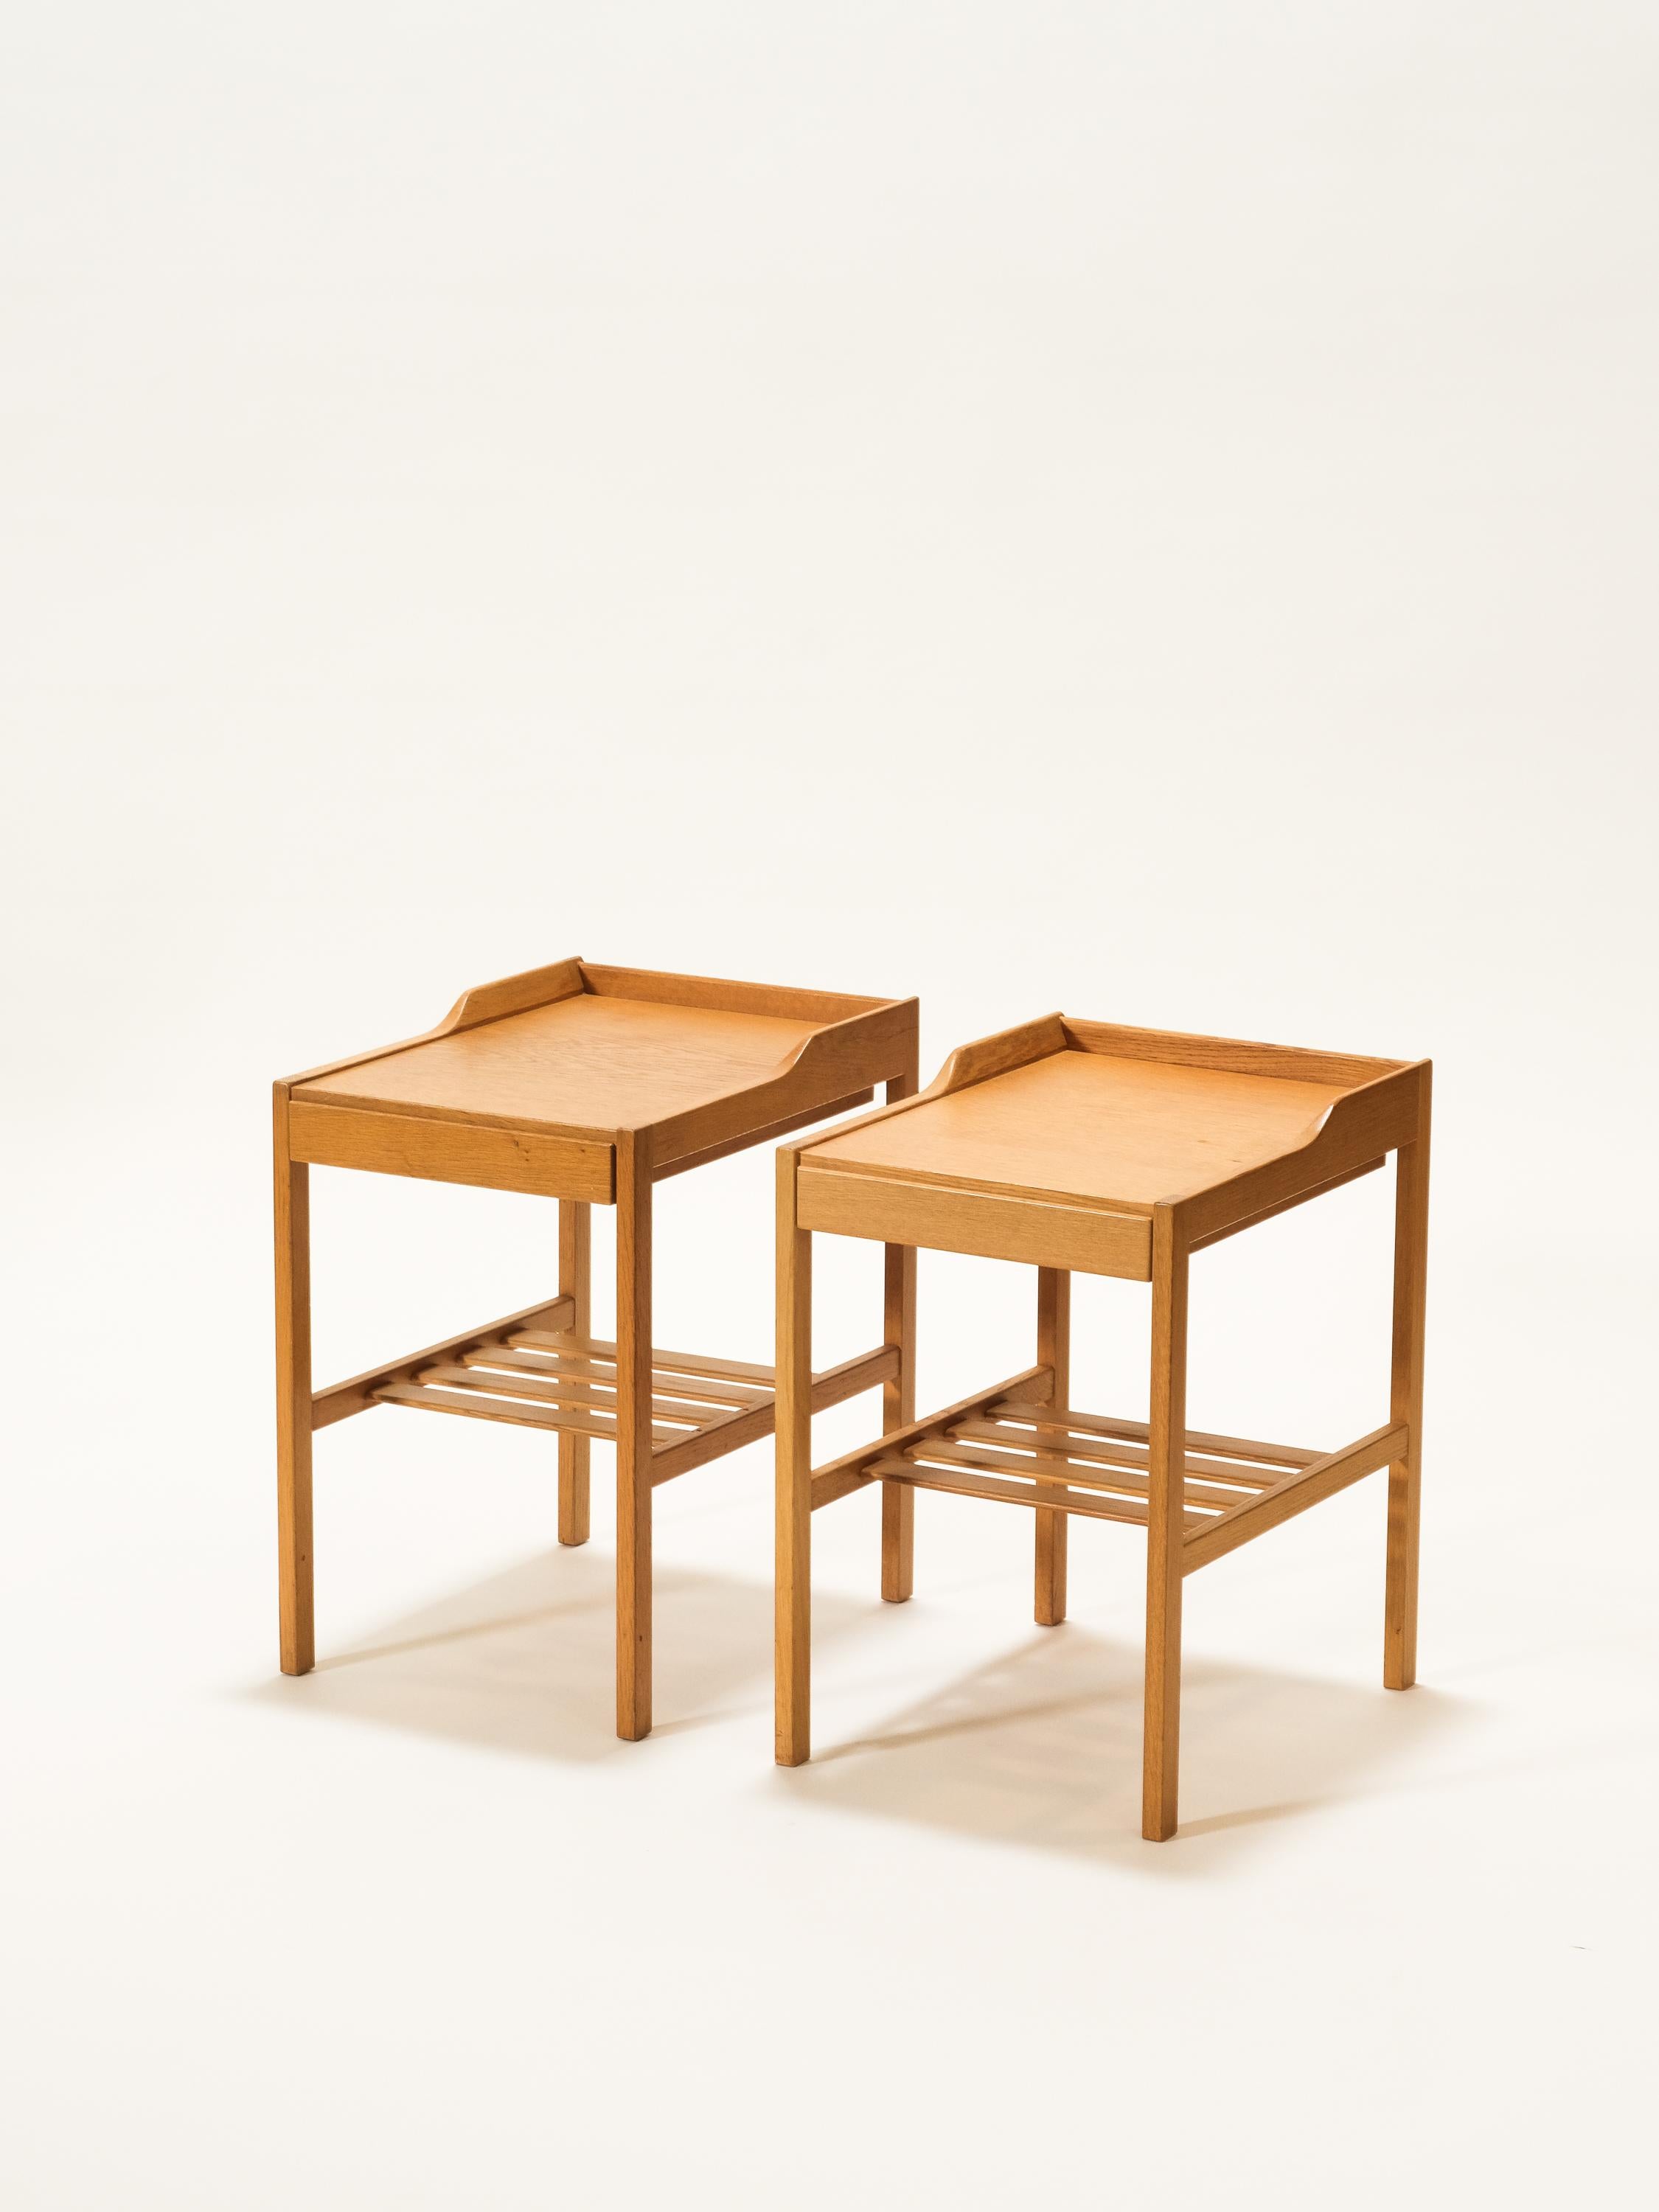 A pair of bedside tables model 3-156 by Bertil Fridhagen for Bodafors, 1960s.
These bedside tables are made if oak and shows a very minimalistic design with great details.